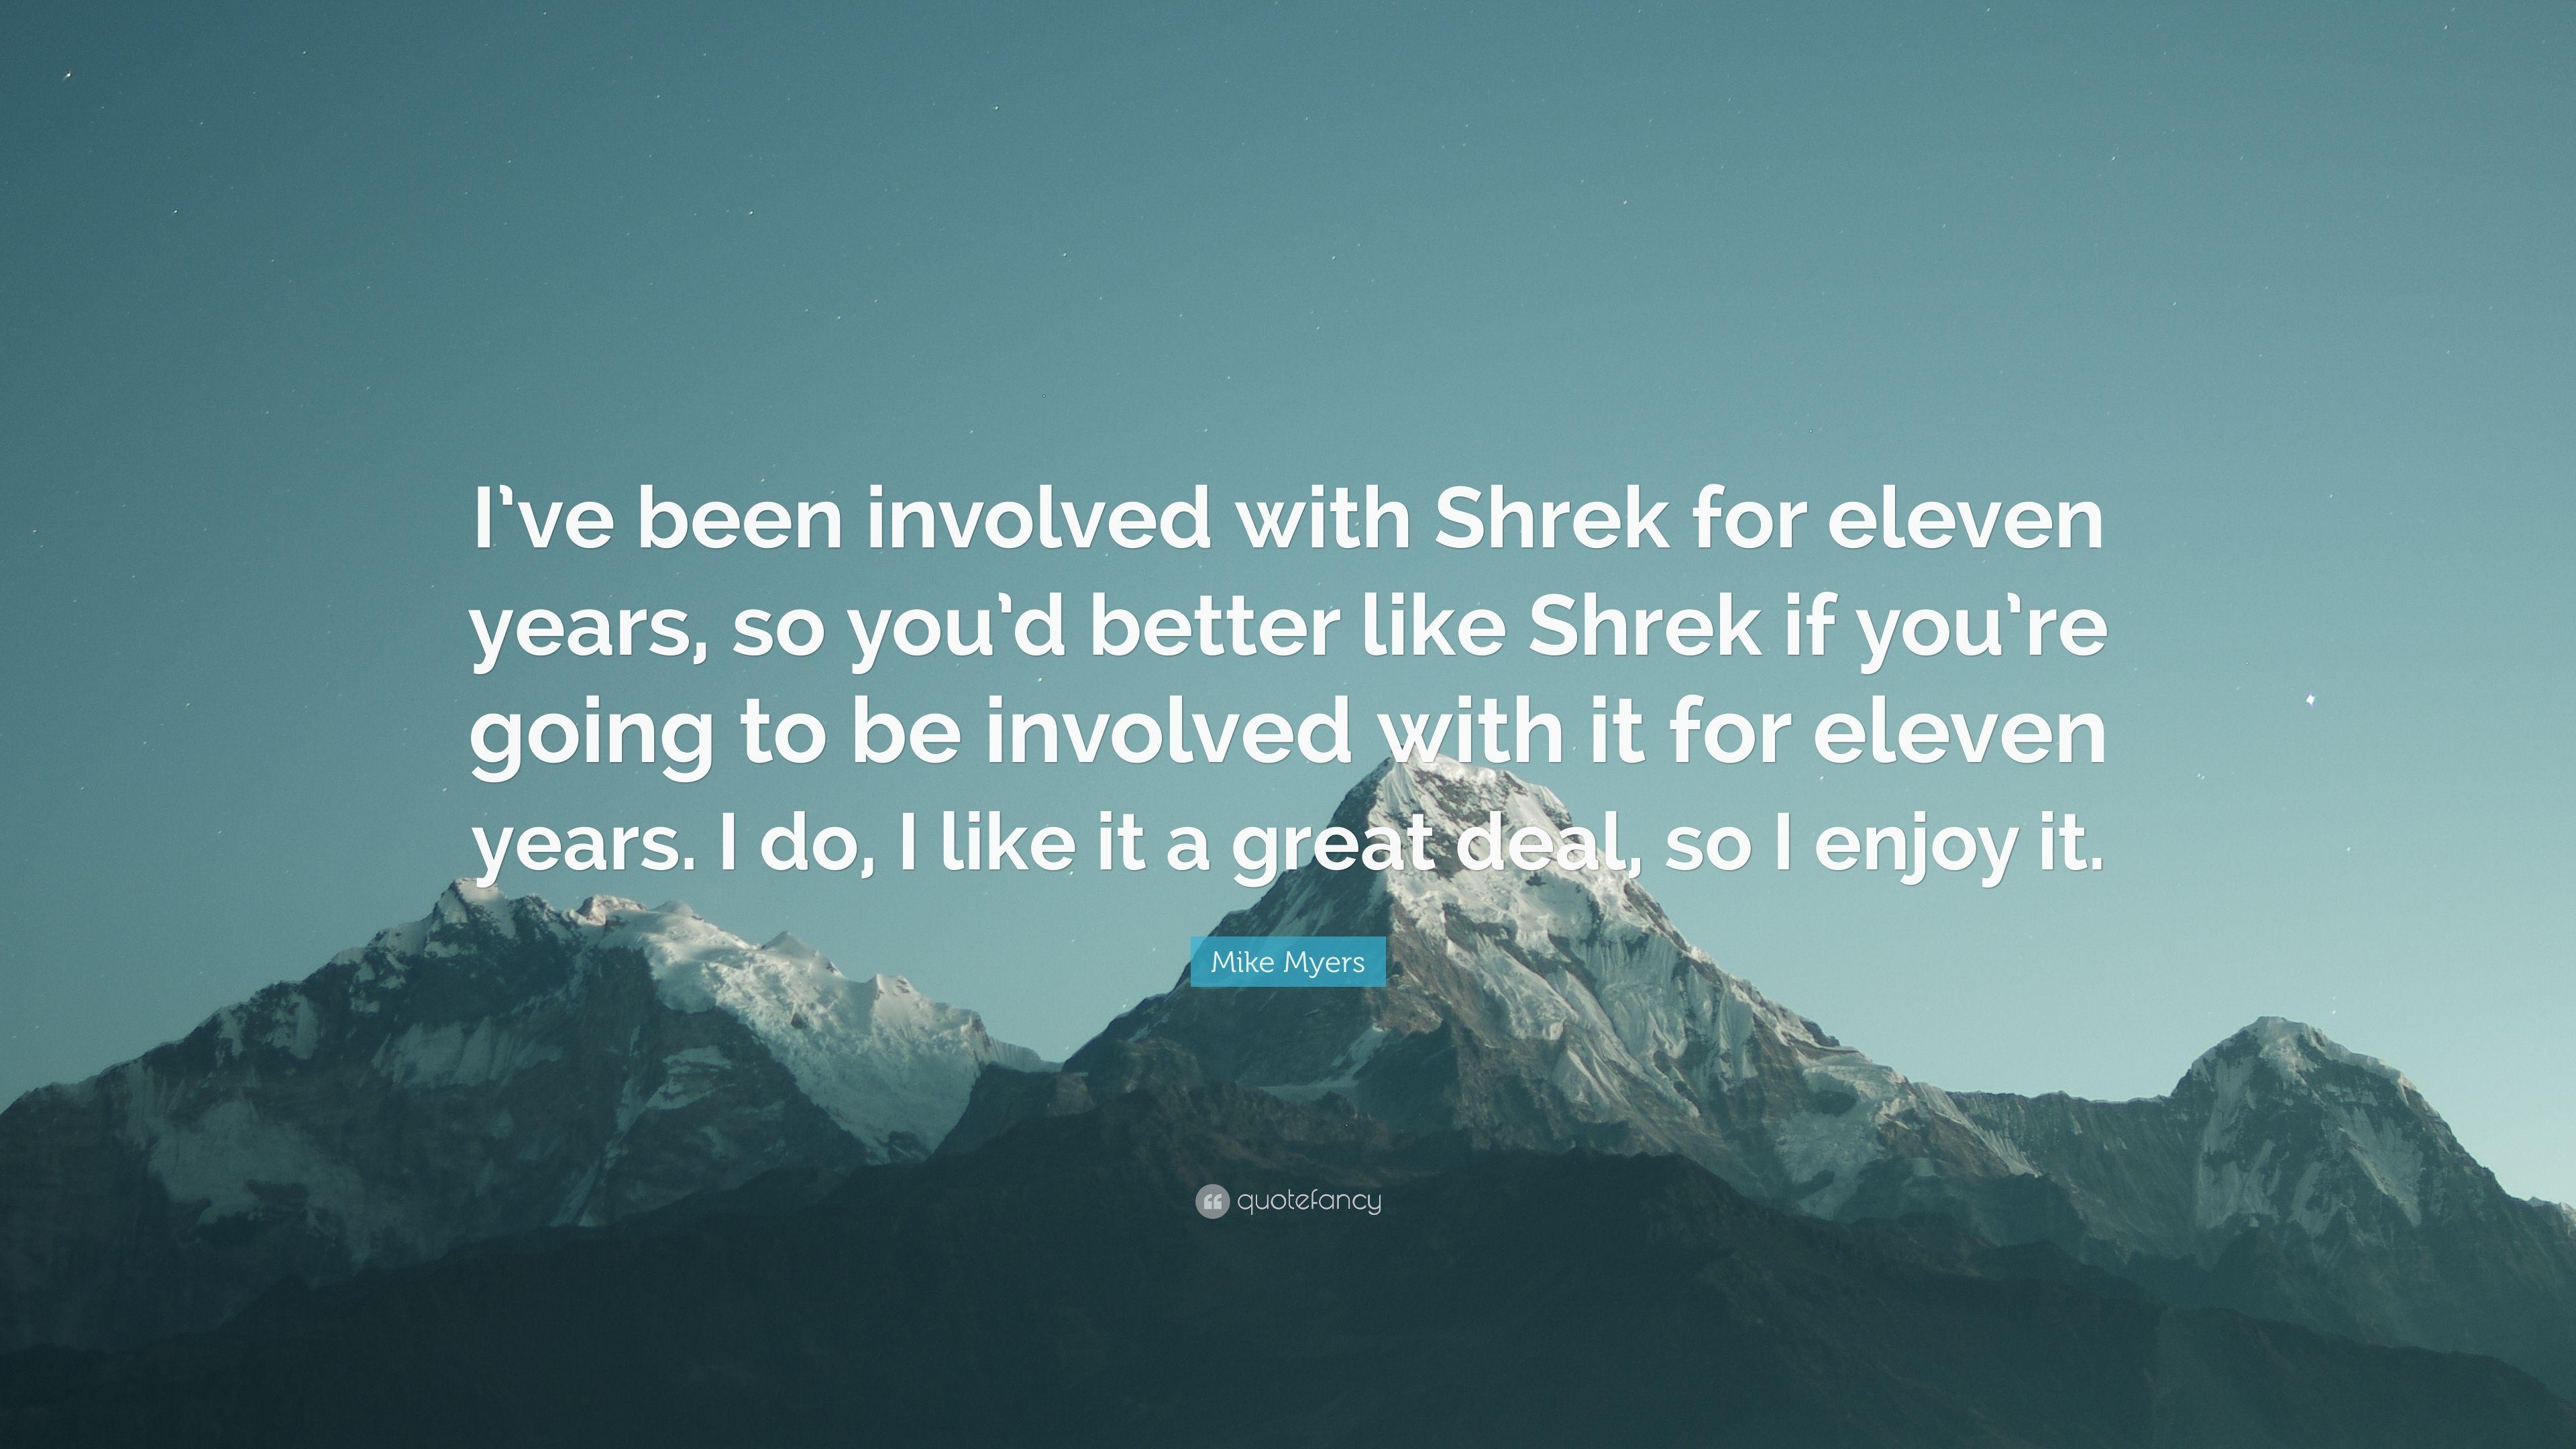 Mike Myers Quote: “I've been involved with Shrek for eleven